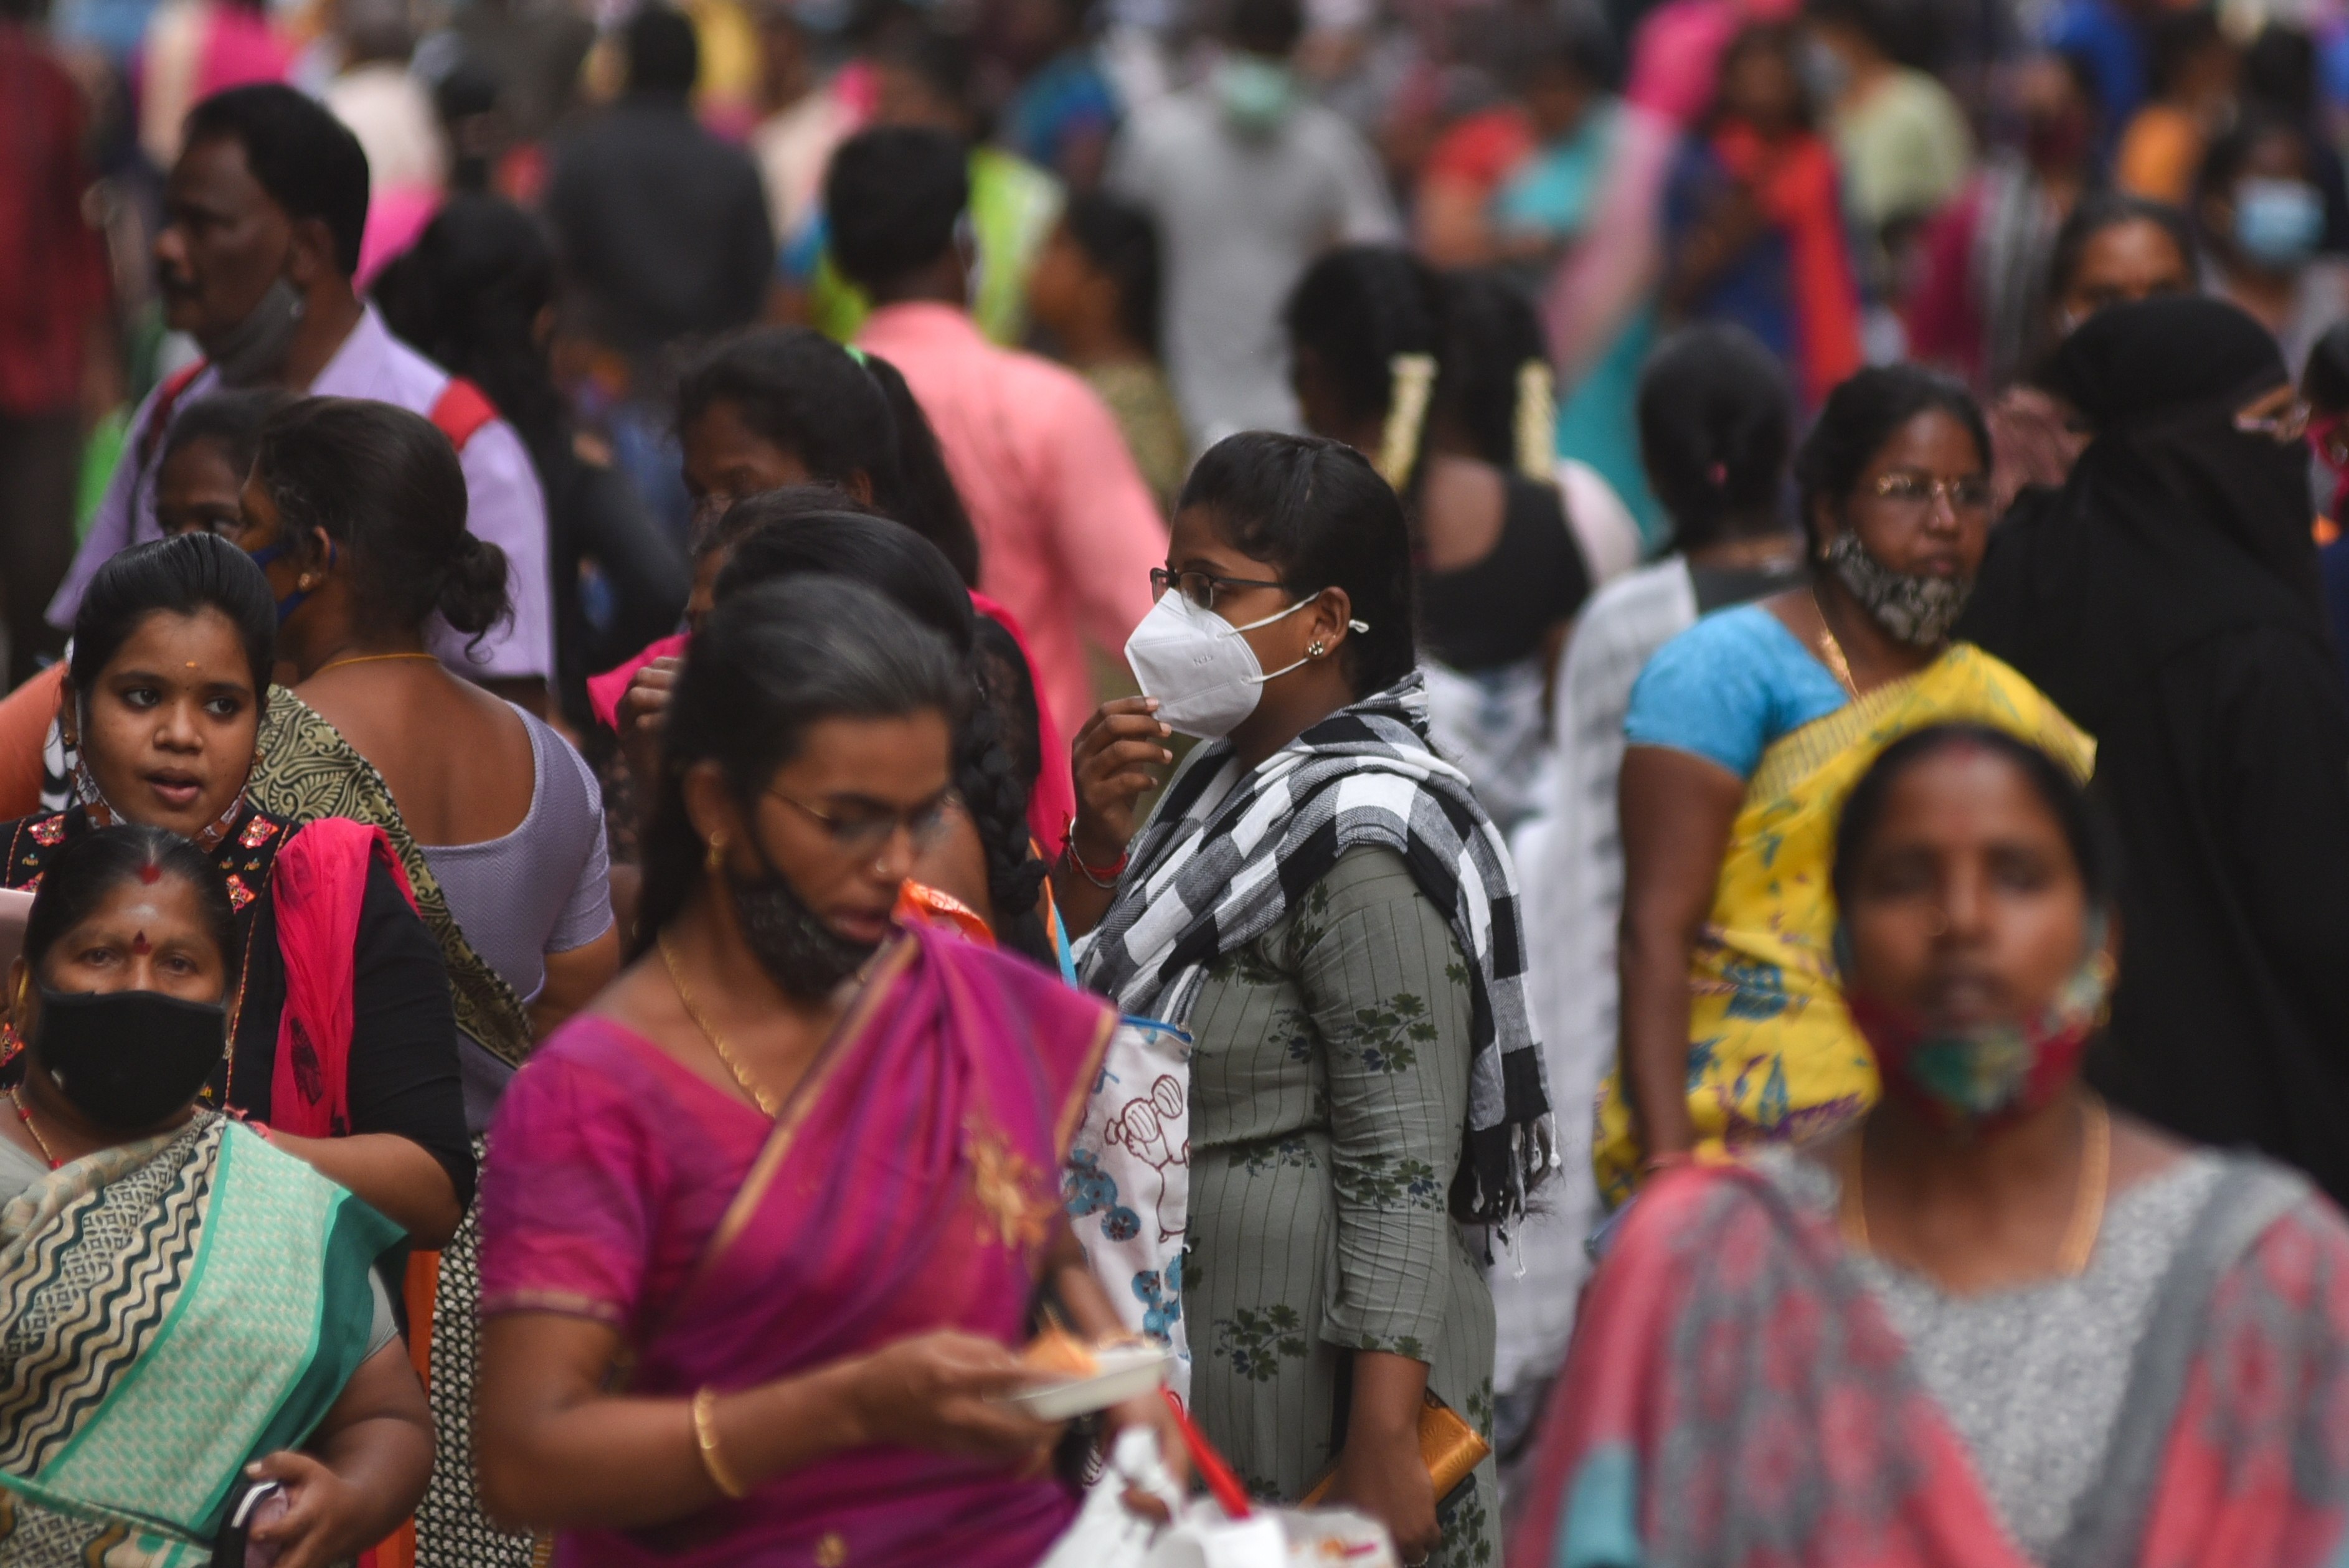 People at crowded market area in Chennai, India. File photo: EPA-EFE